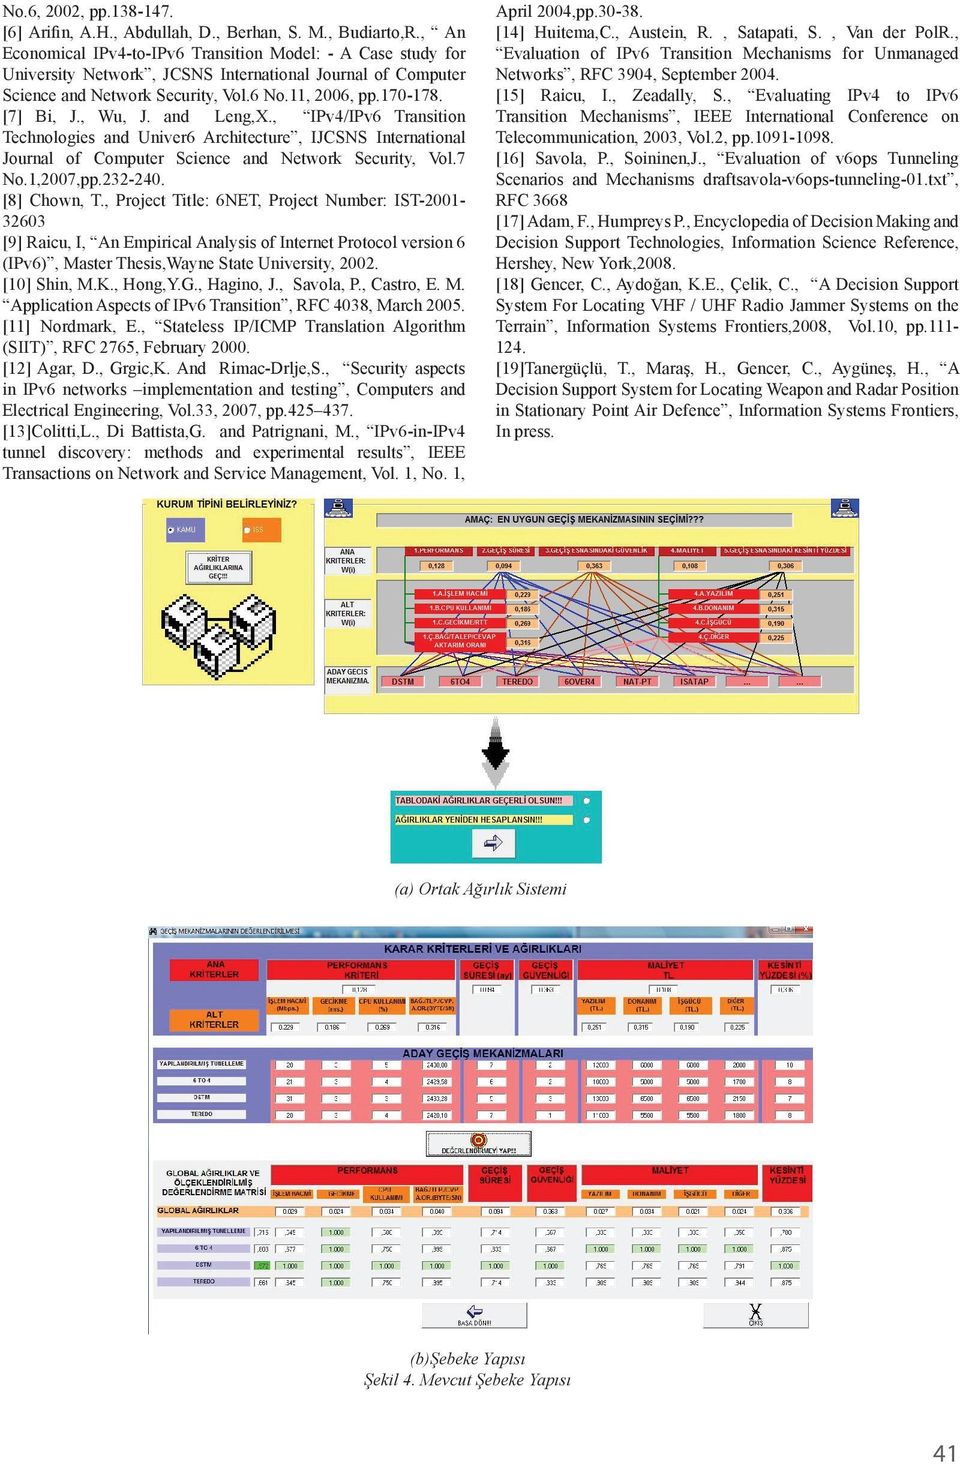 , Wu, J. and Leng,X., IPv4/ Transition Technologies and Univer6 Architecture, IJCSNS International Journal of Computer Science and Network Security, Vol.7 No.1,2007,pp.232-240. [8] Chown, T.